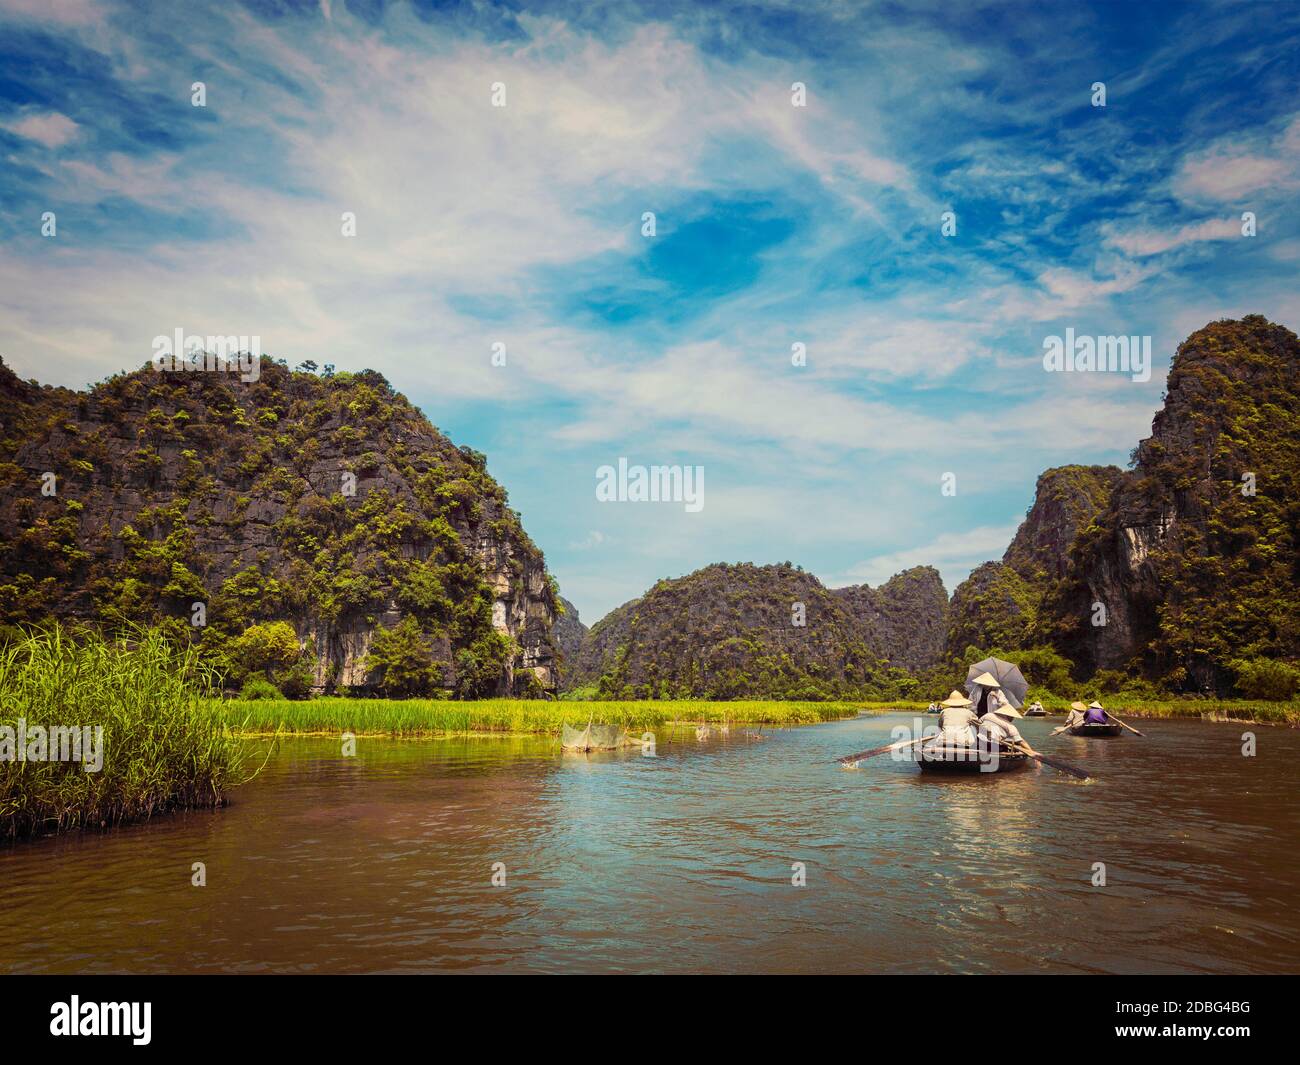 Vintage retro effect filtered hipster style image of tourists on boats in Tam Coc-Bich Dong Ngo Dong river in popular tourist destination near Ninh Bi Stock Photo